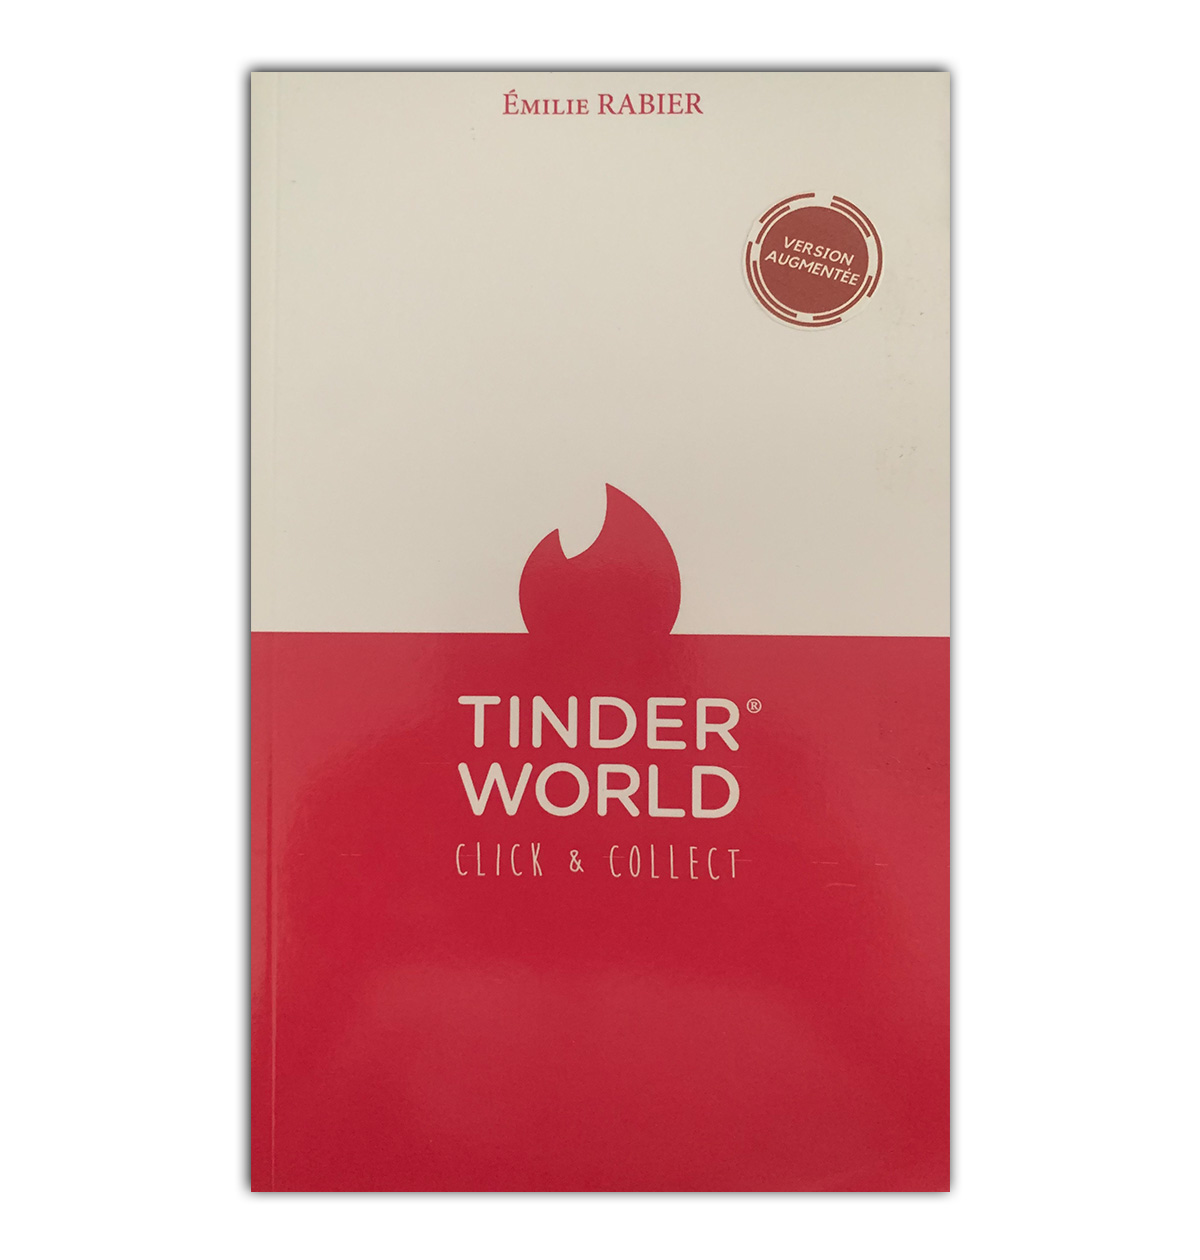 Tinder world - Click and collect